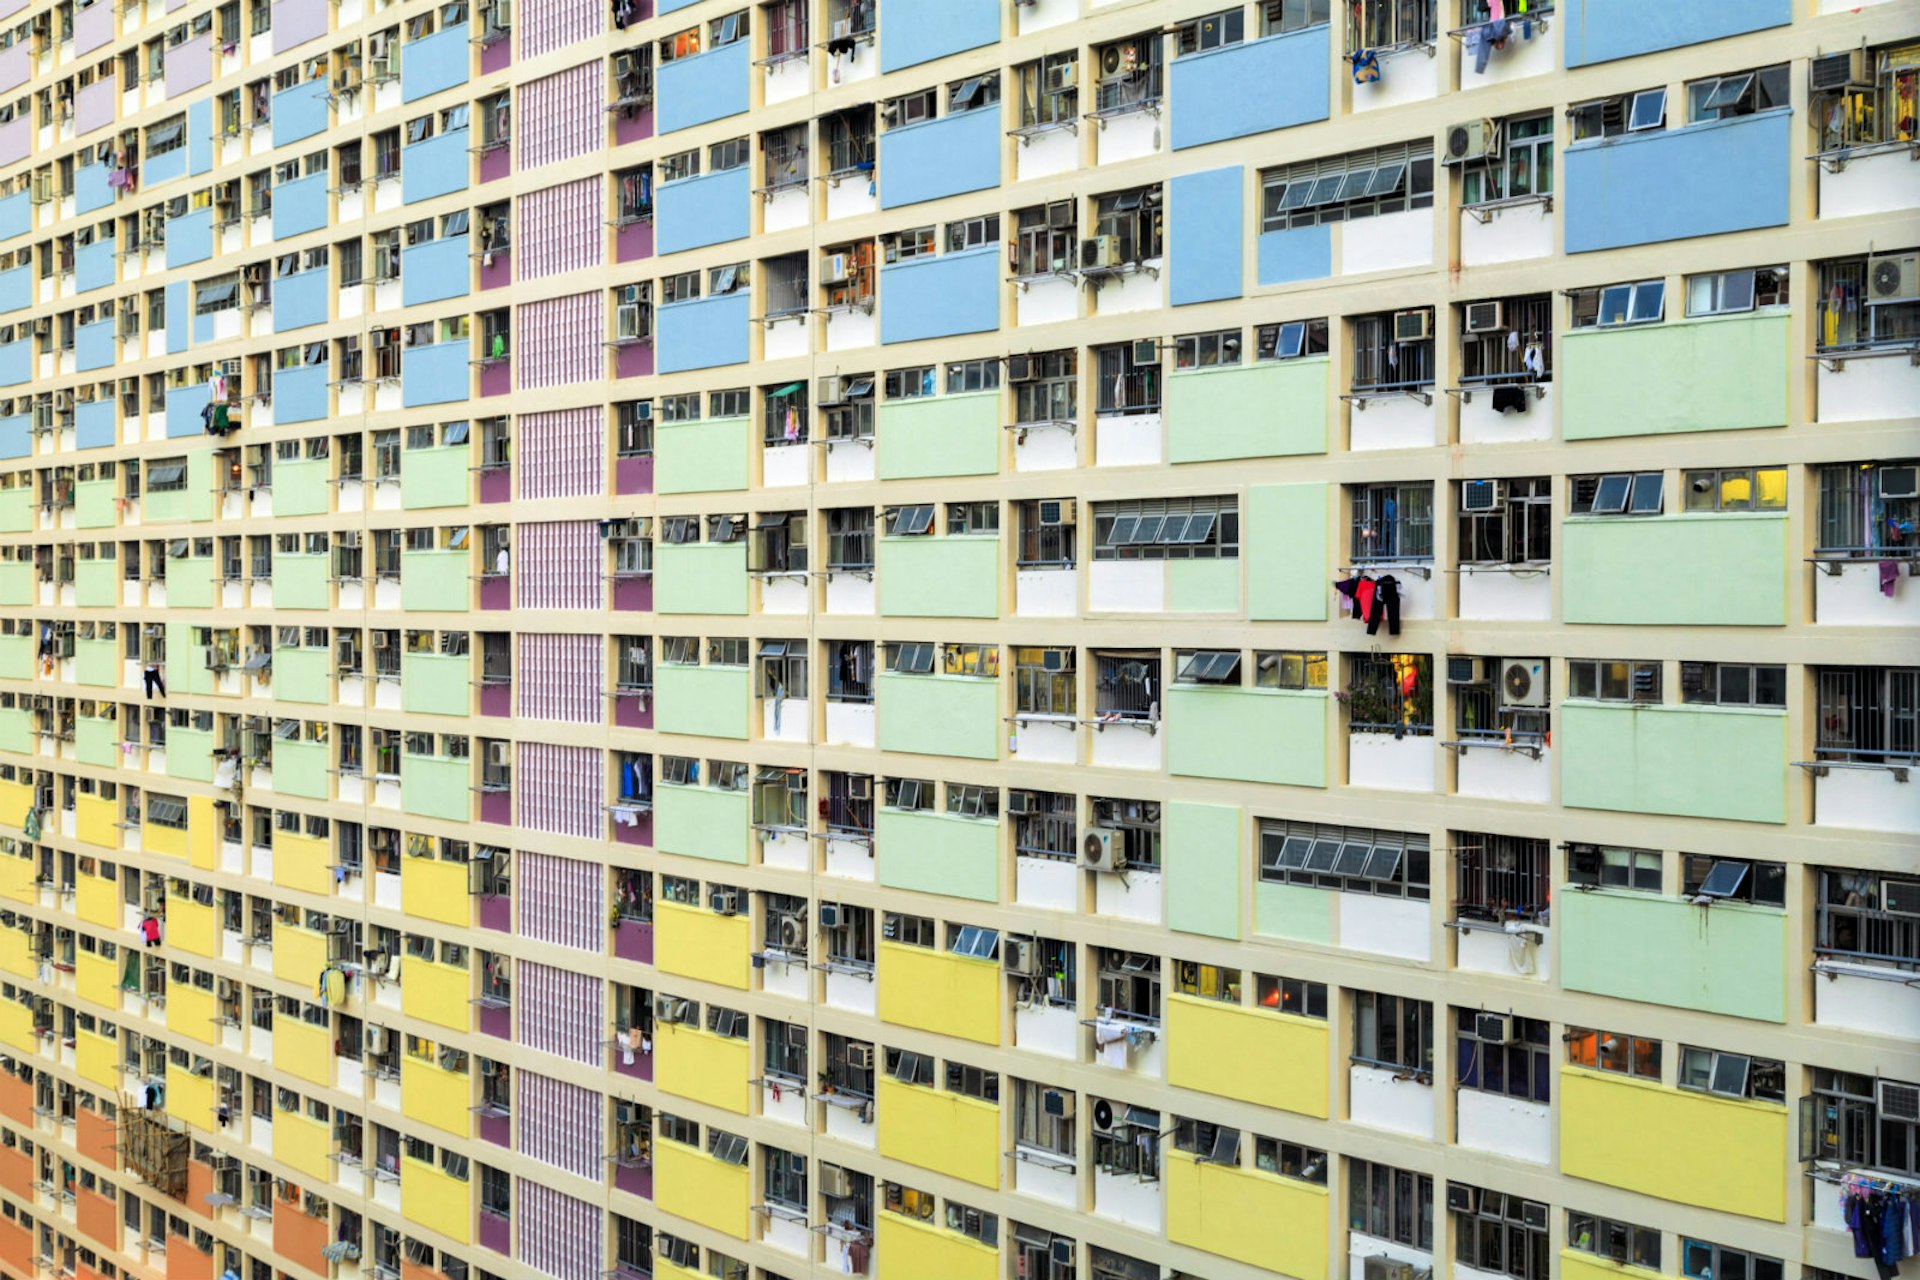 The iconic tones of the Choi Hung Estate © Kenneth lp / Shutterstock